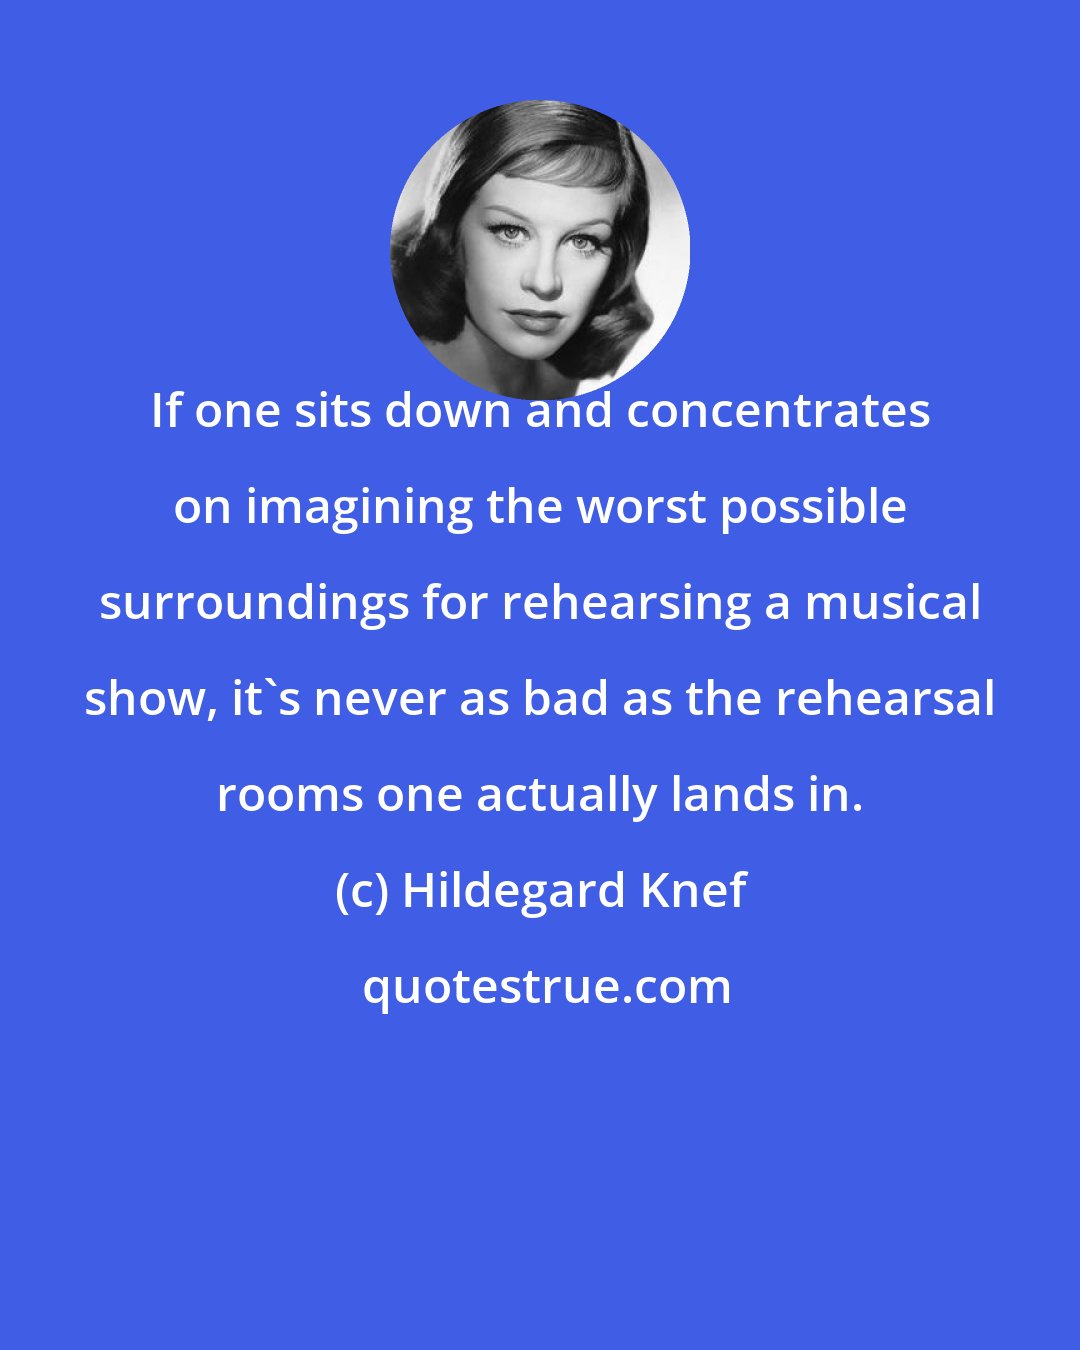 Hildegard Knef: If one sits down and concentrates on imagining the worst possible surroundings for rehearsing a musical show, it's never as bad as the rehearsal rooms one actually lands in.